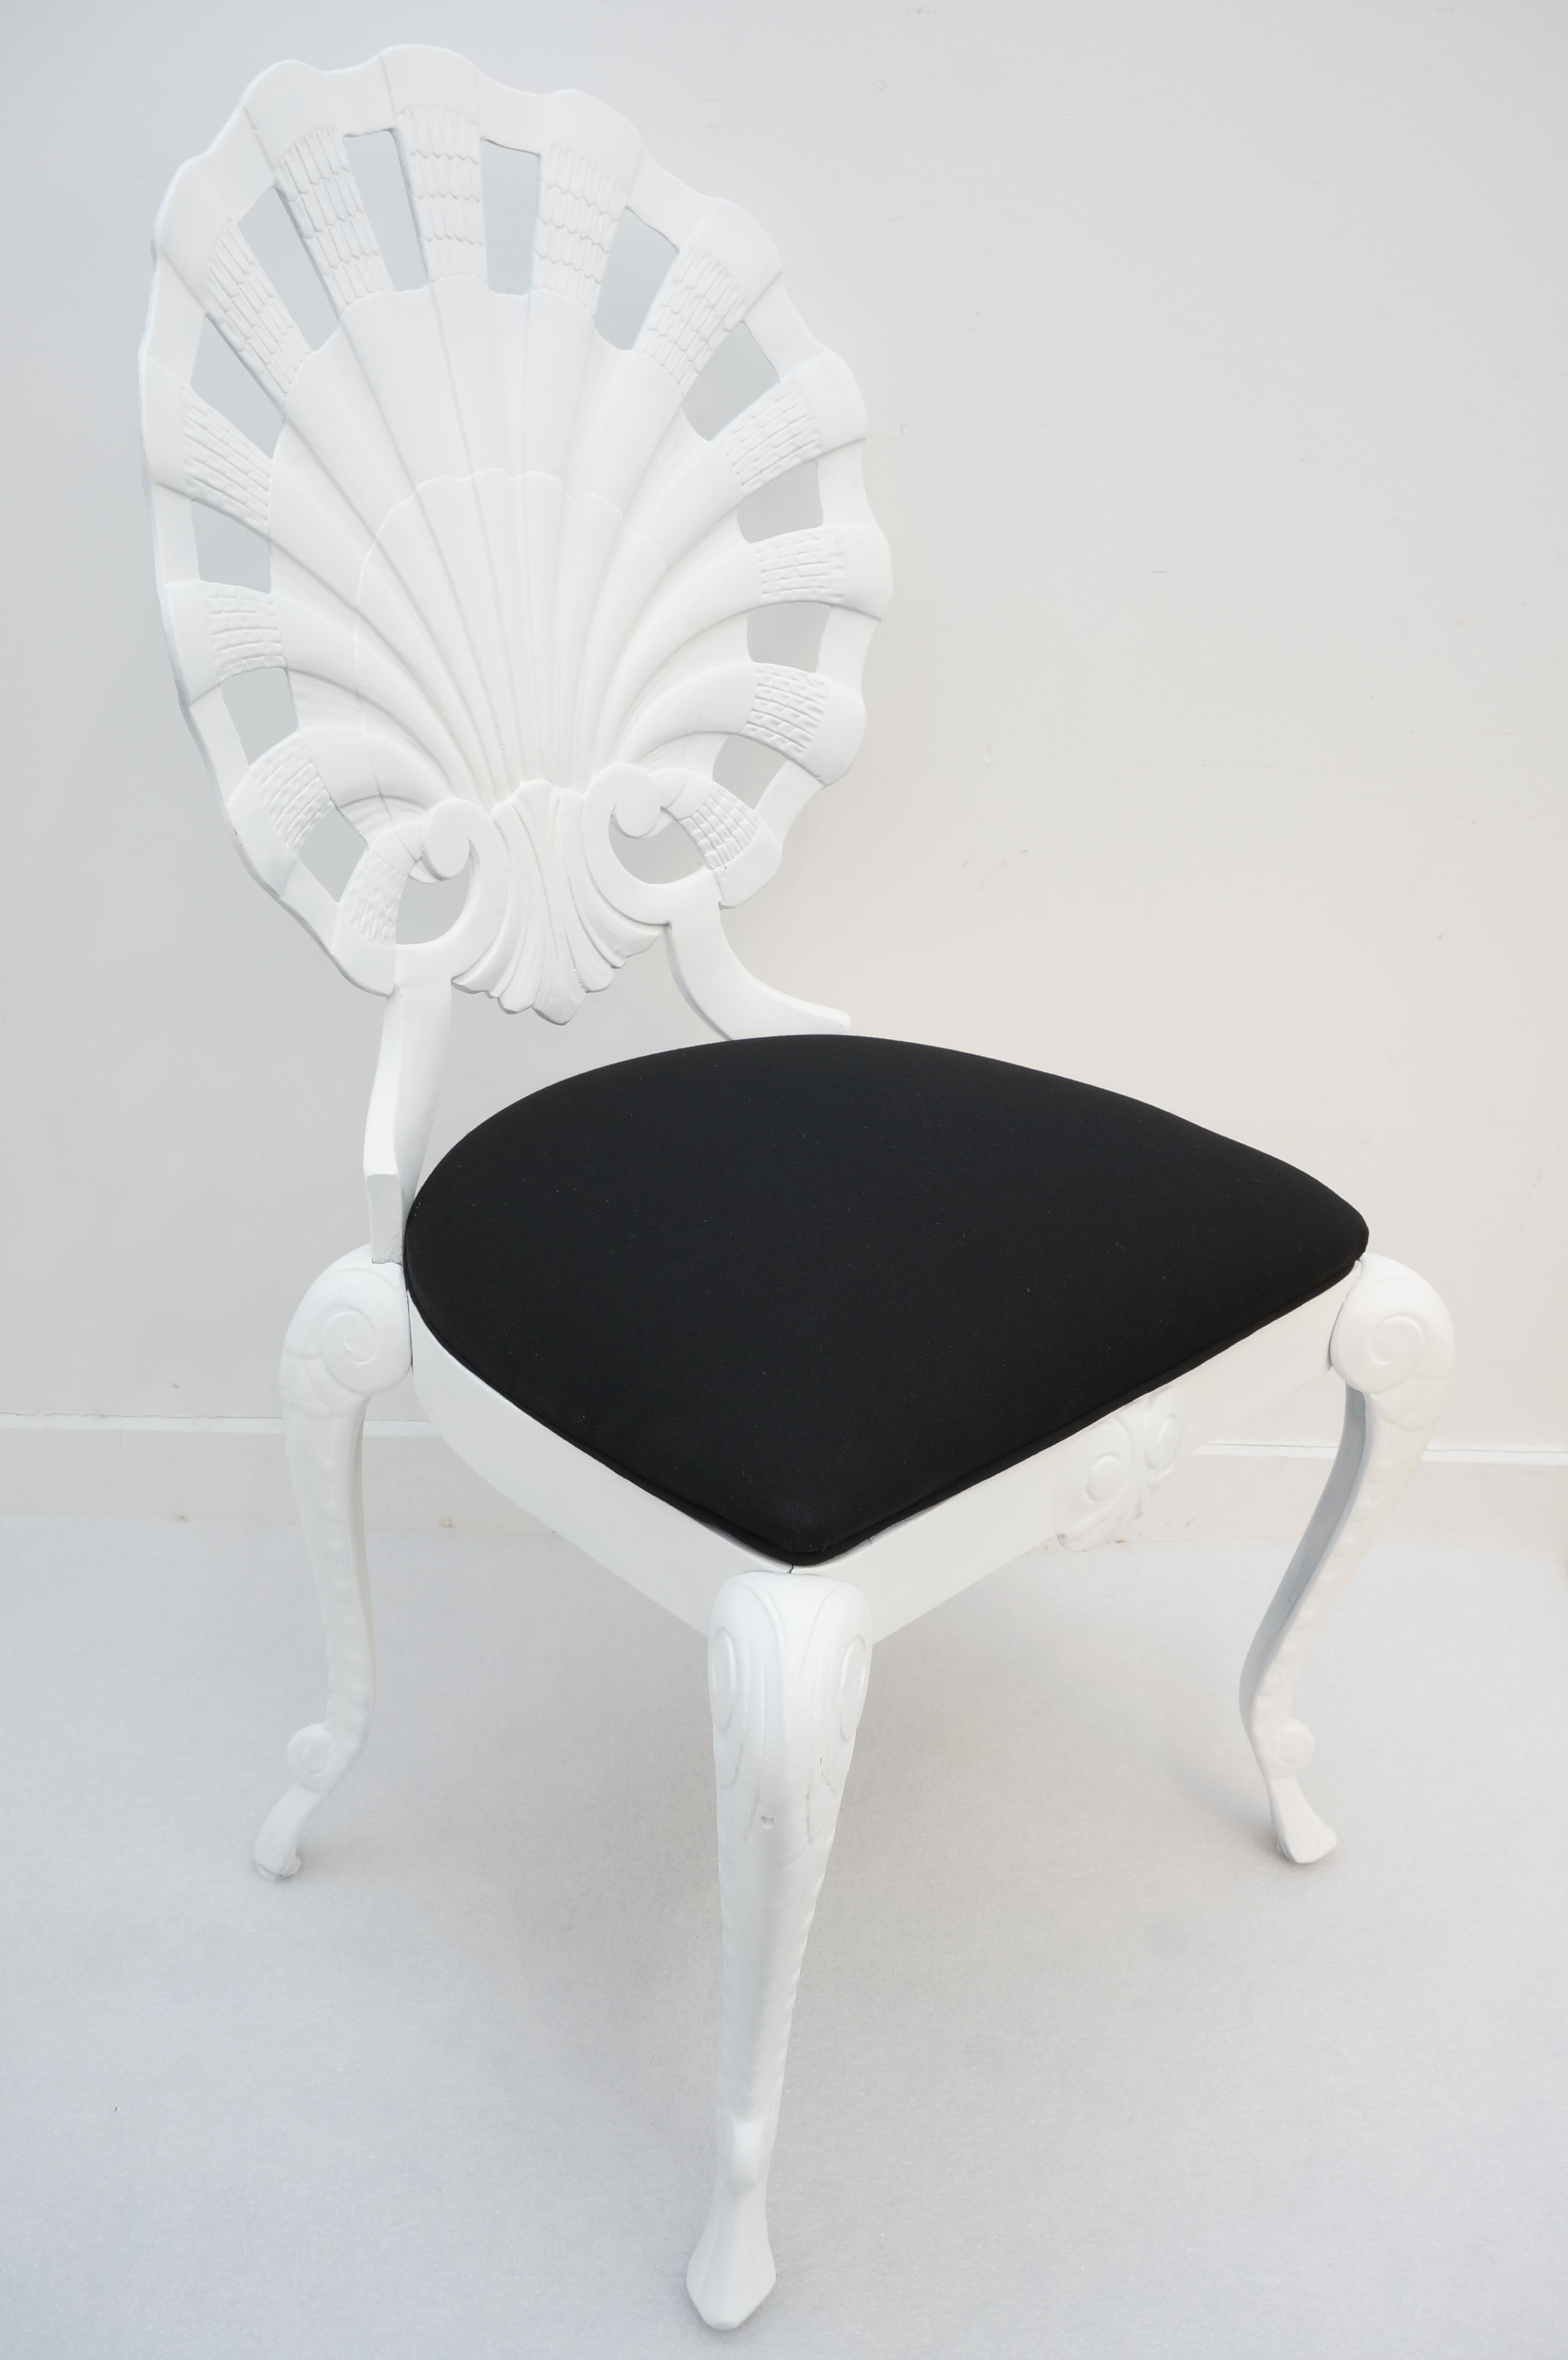 This styish grotto, clamshell side chair will make a statement with its form and give your garden or home a Hollywood Regency vibe.

Note: The piece has been professioanlly painted in a matte white and reupholsterd with black sunbrella fabric.

 